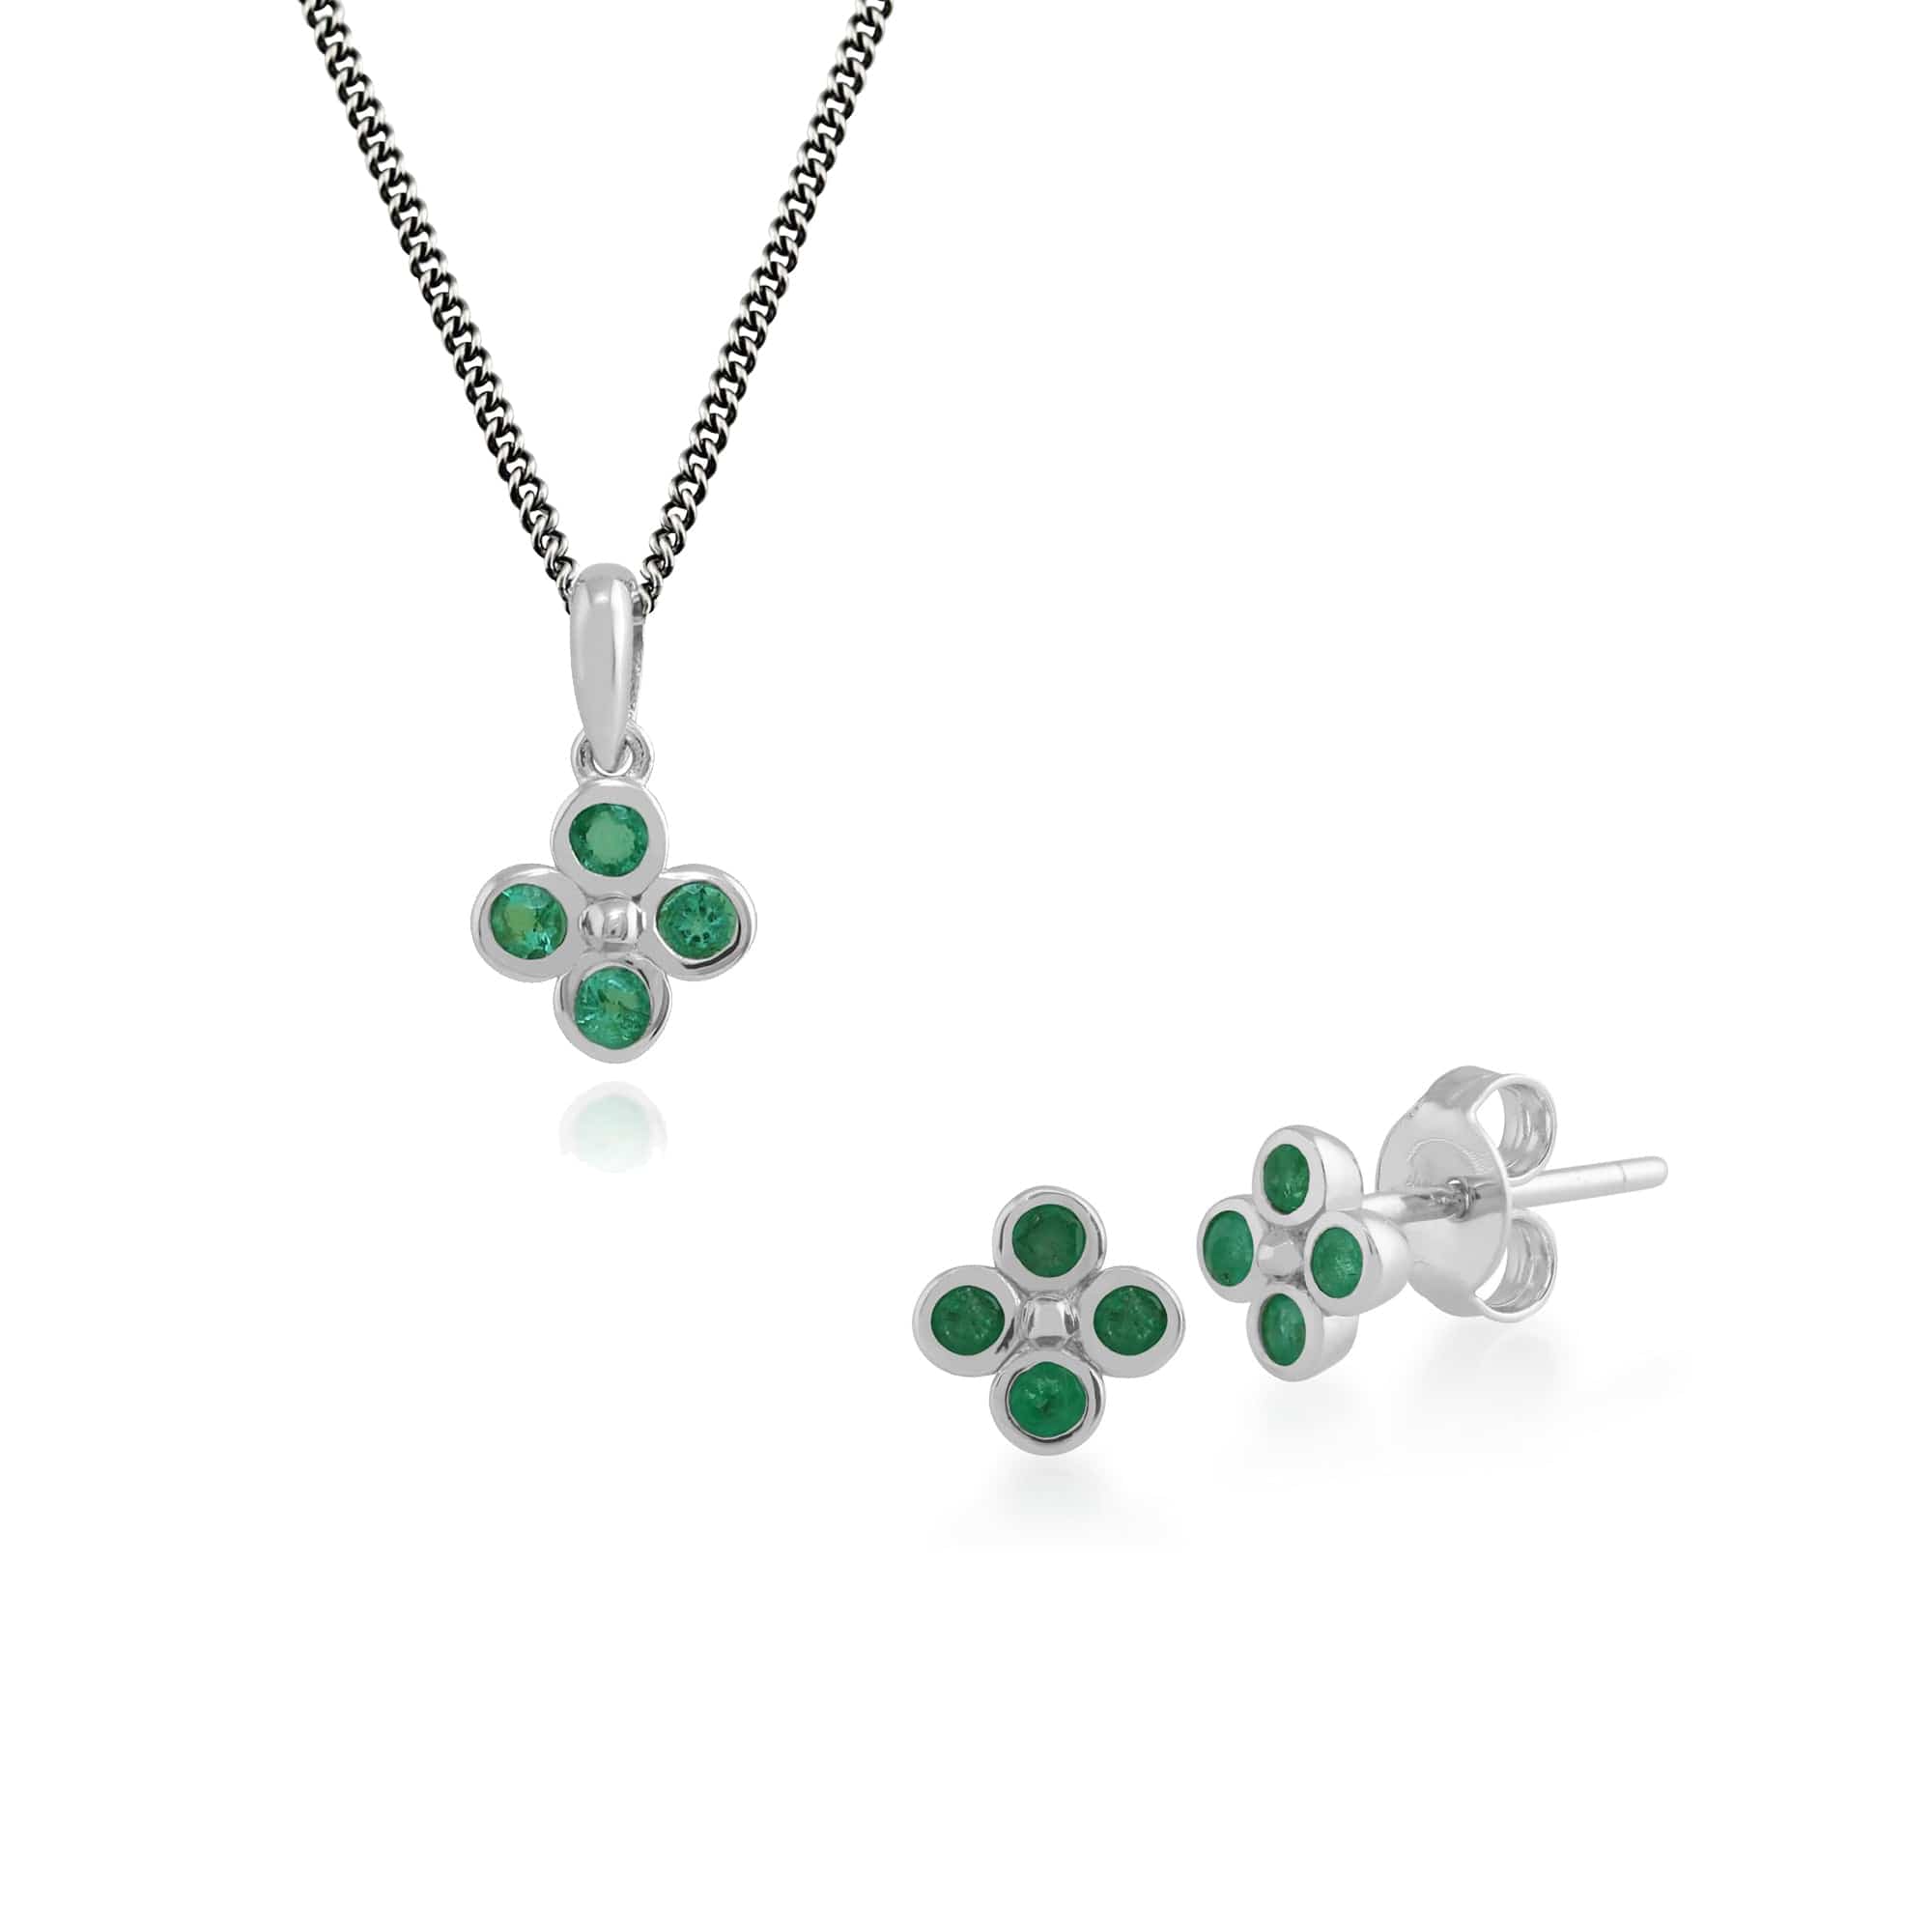 270E020401925-270P022001925 Floral Round Emerald Clover Stud Earrings & Pendant Set in 925 Sterling Silver 1